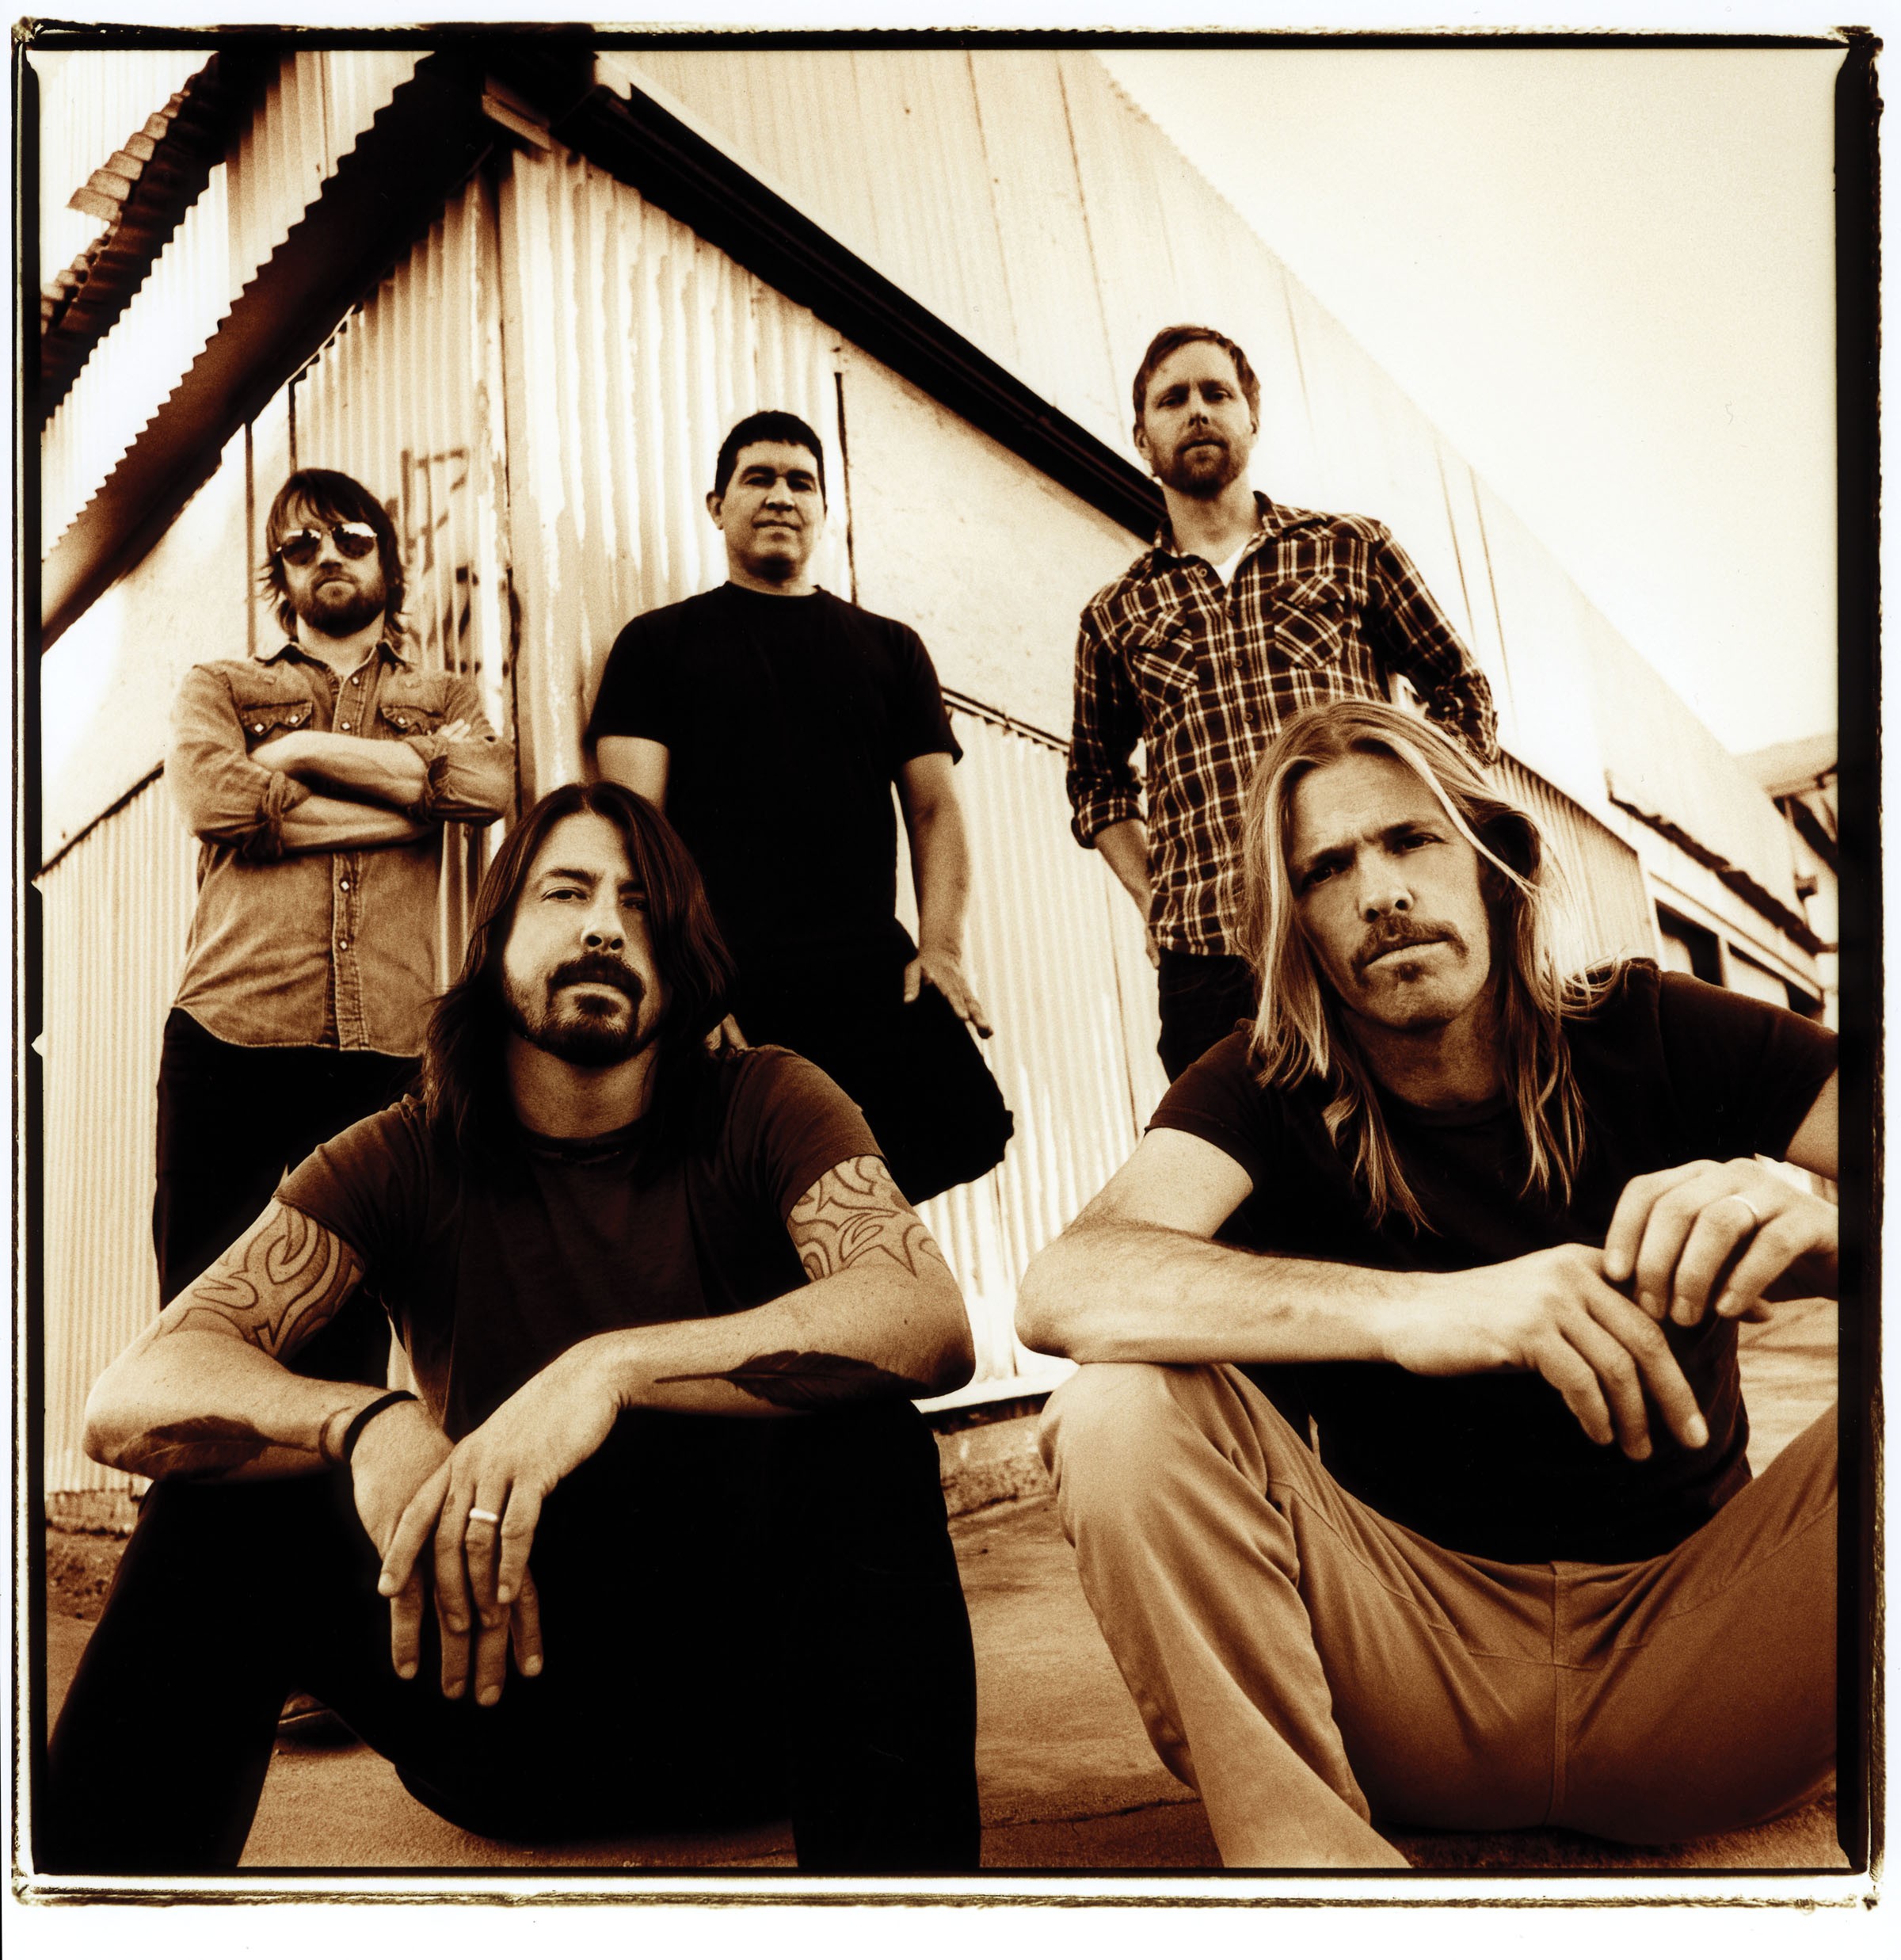 Crowdfunding Effort Under Way for Foo Fighters Show | Music | Style